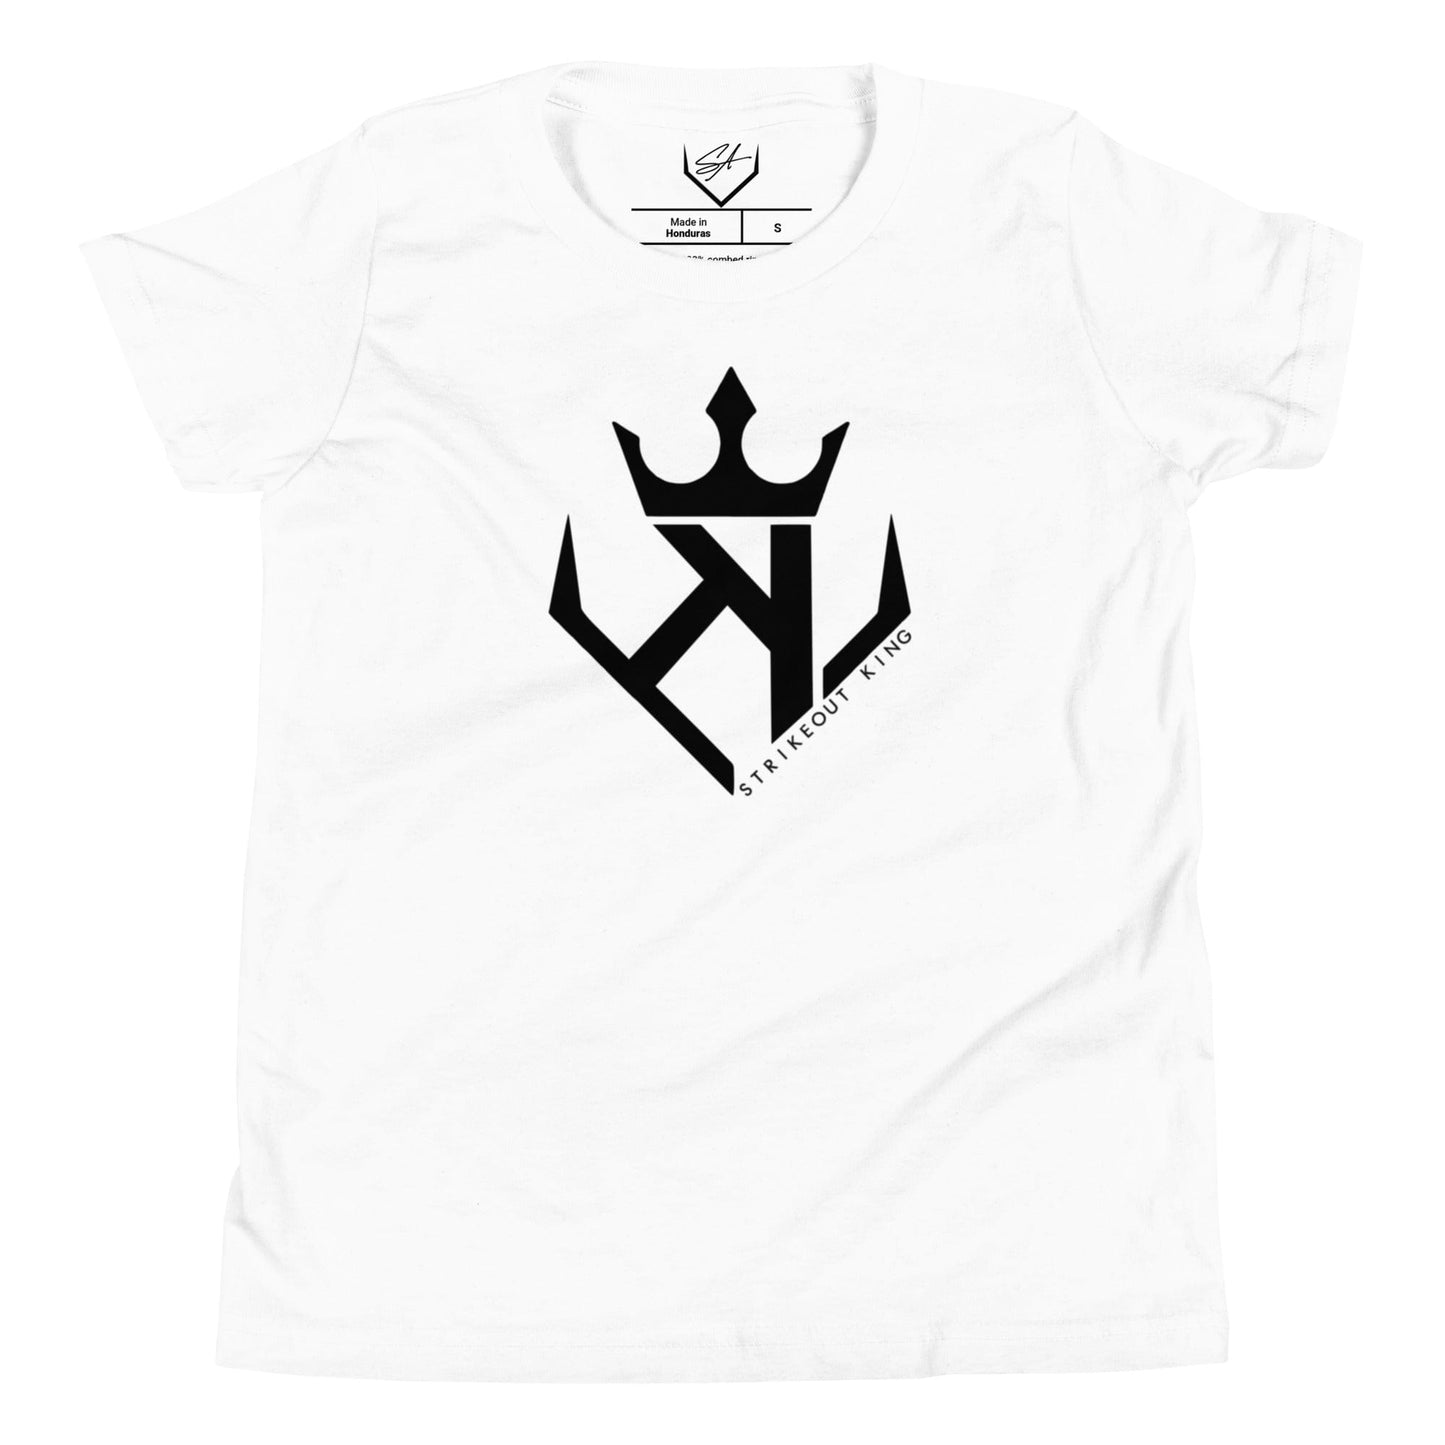 Strikeout King - Youth Tee